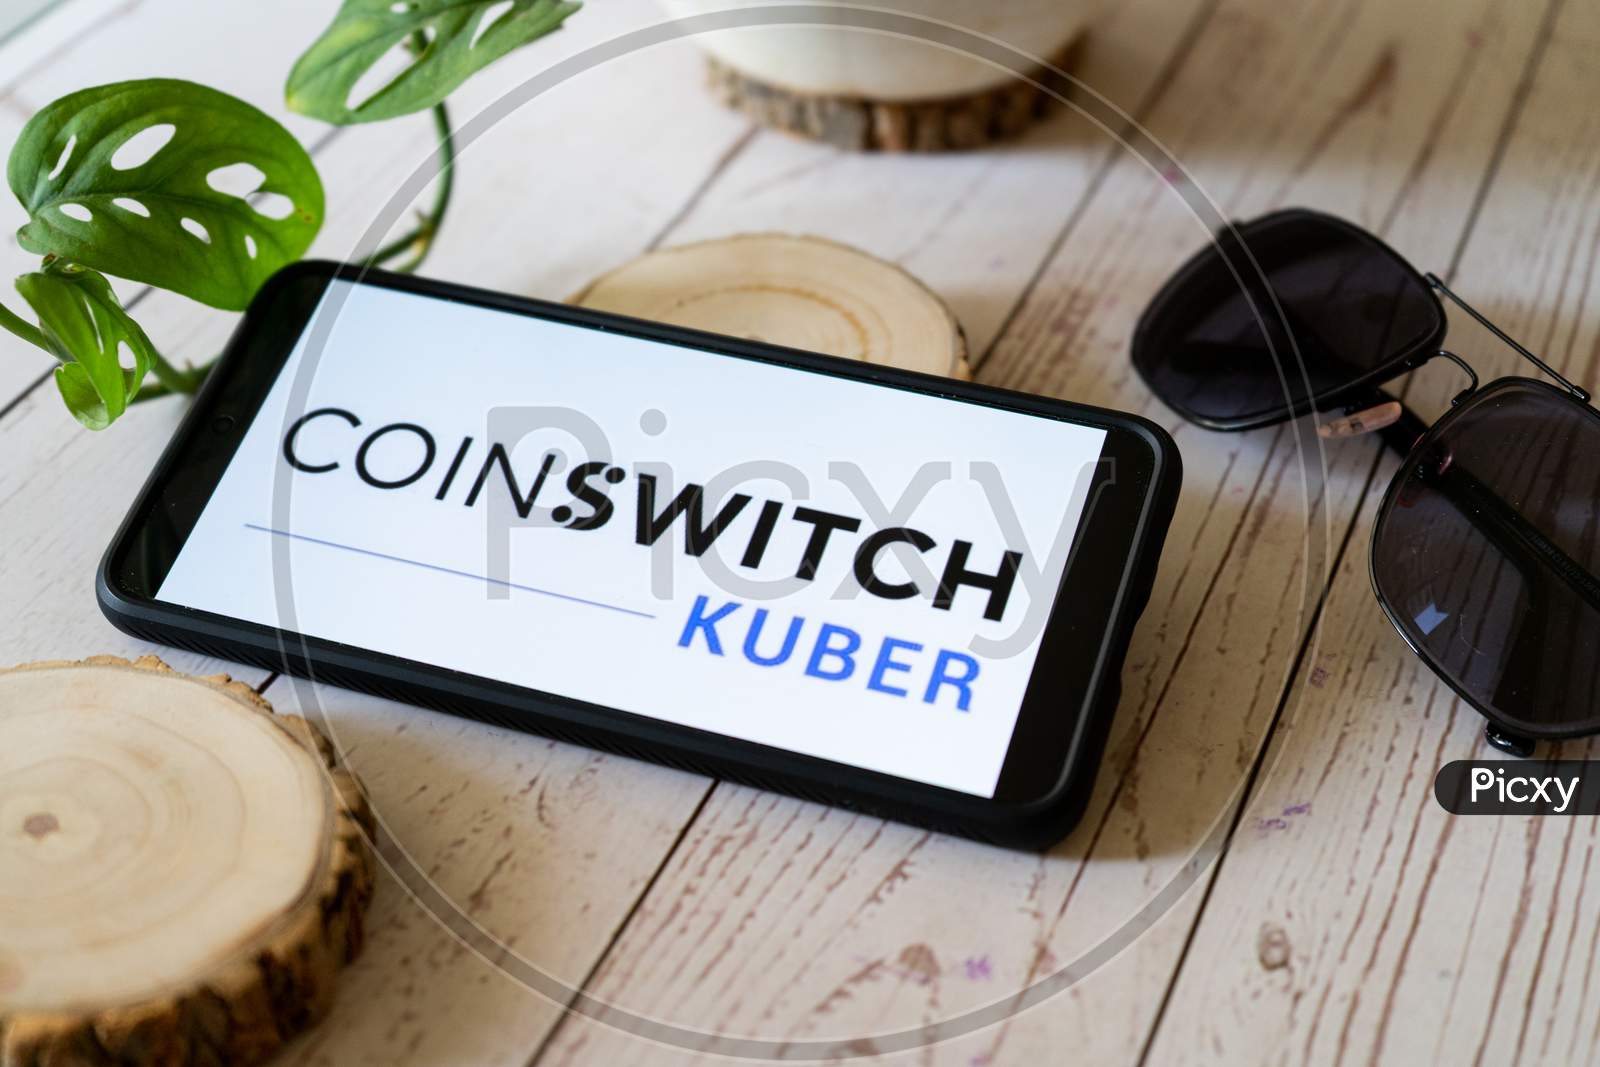 Indian Startup Blockchain Bitcoin Altcoin App Coinswitch Kuber On A Mobile Phone On A Wooden Table Showing This Easy Legal Way To Trade Etherium And Dogecoin In India